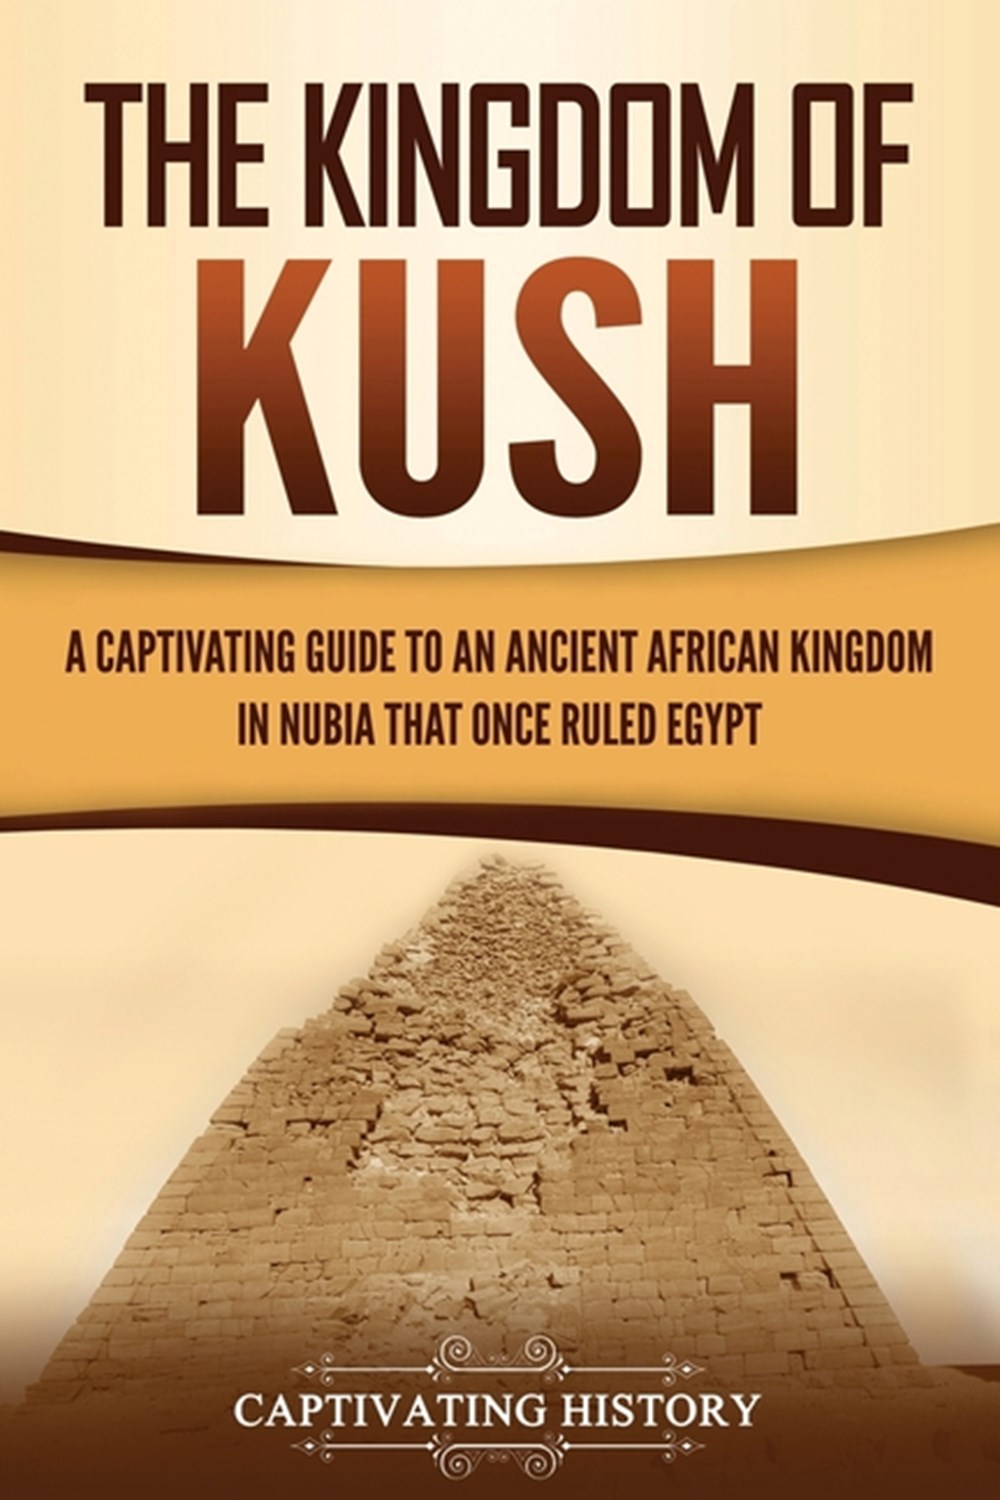 Kingdom of Kush: A Captivating Guide to an Ancient African Kingdom in Nubia That Once Ruled Egypt